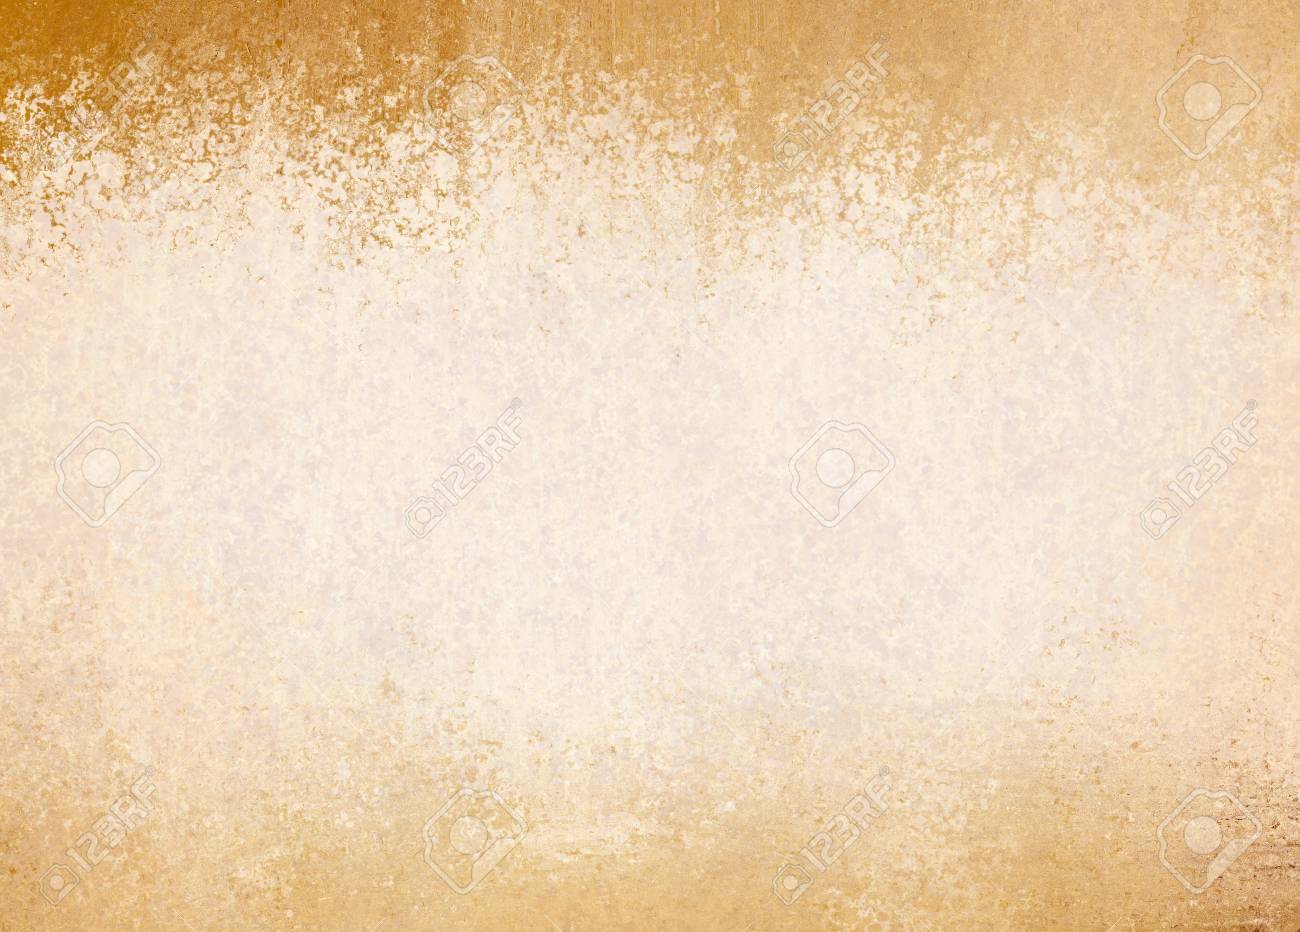 Old Yellowed Paper Background With Vintage Texture Layout Off